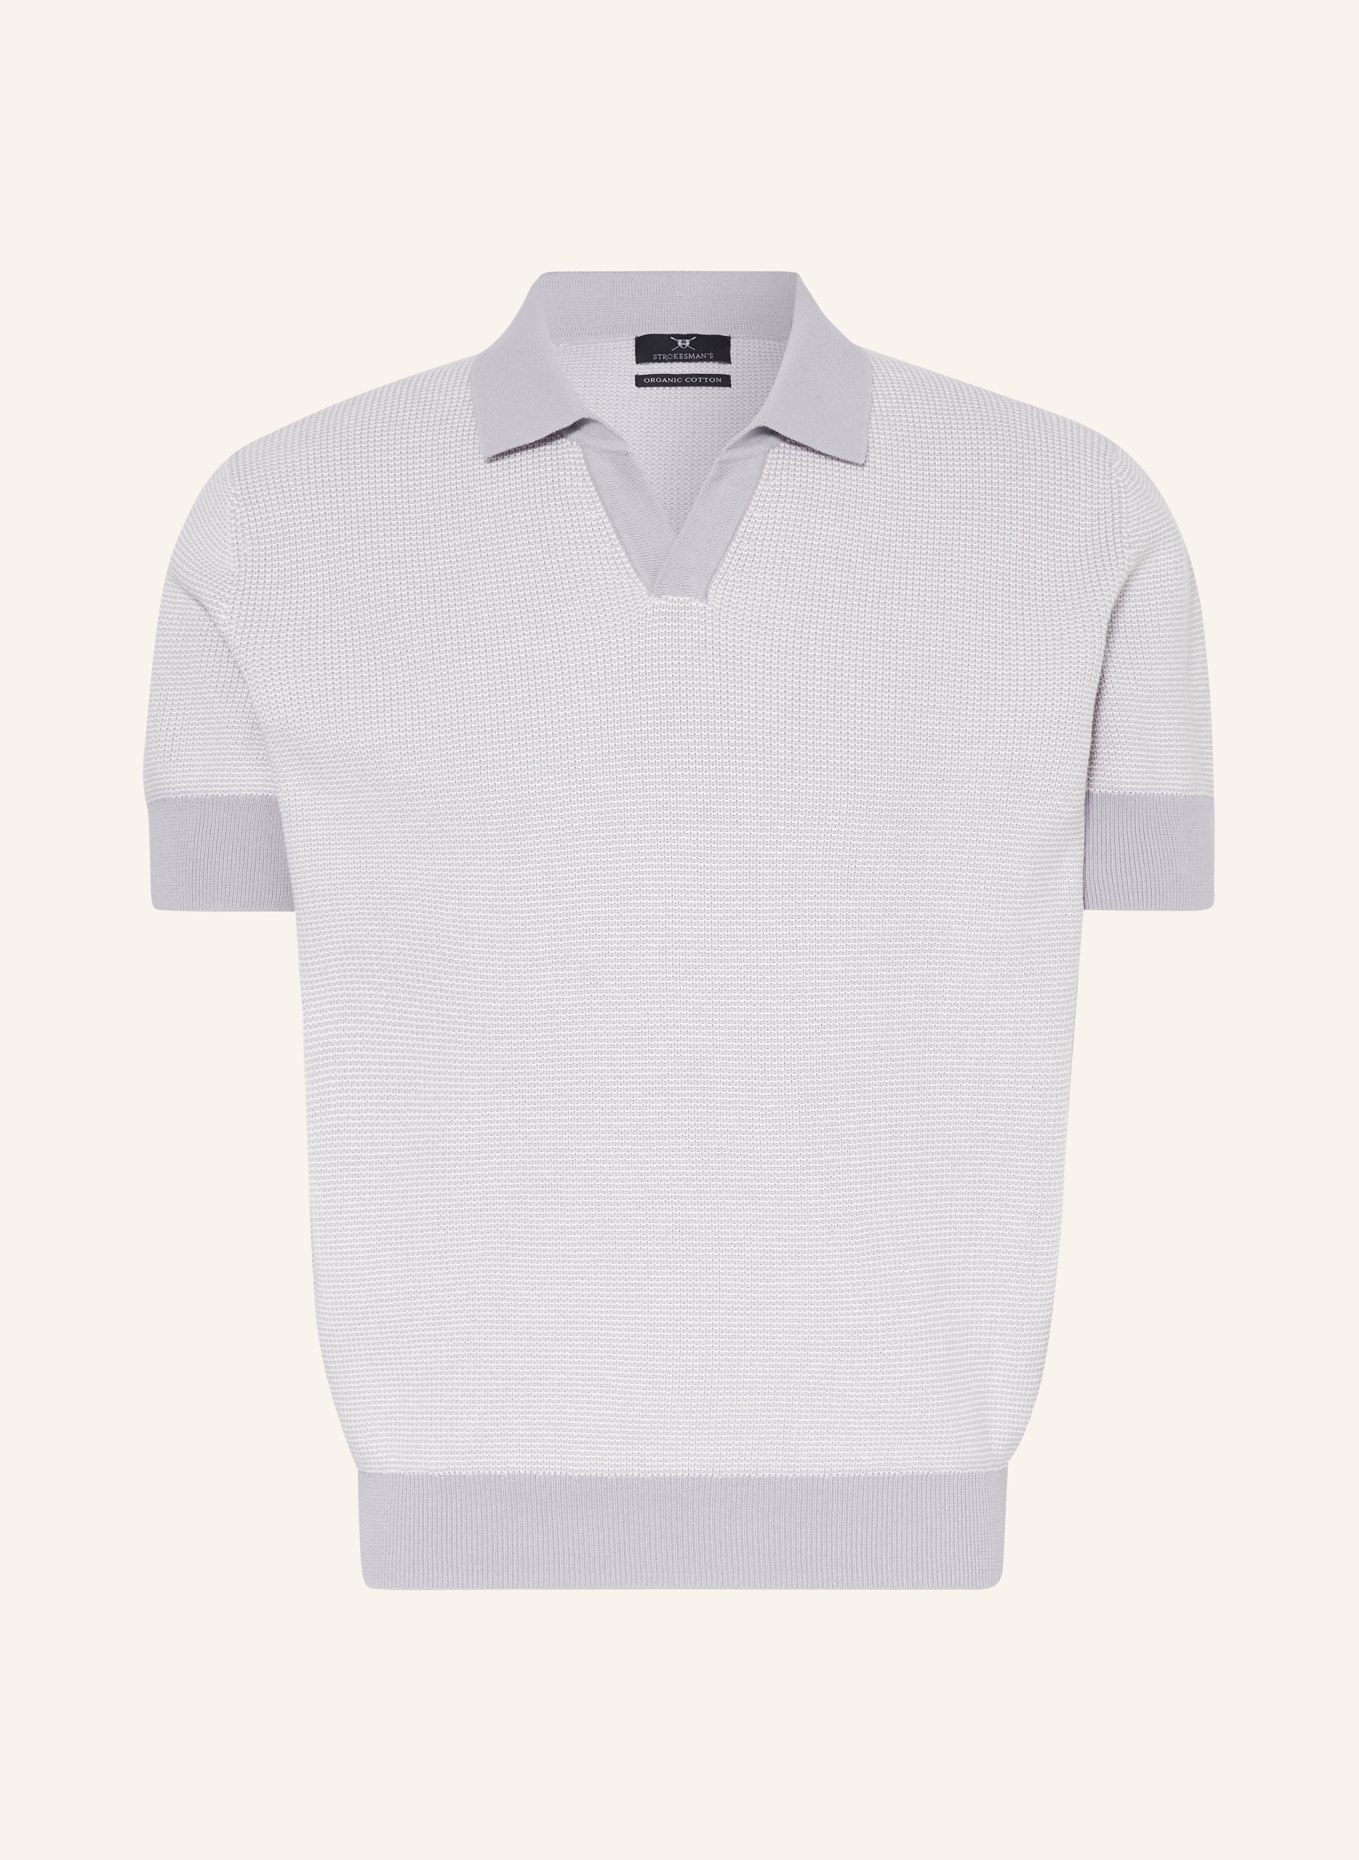 STROKESMAN'S Knitted polo shirt, Color: LIGHT GRAY (Image 1)